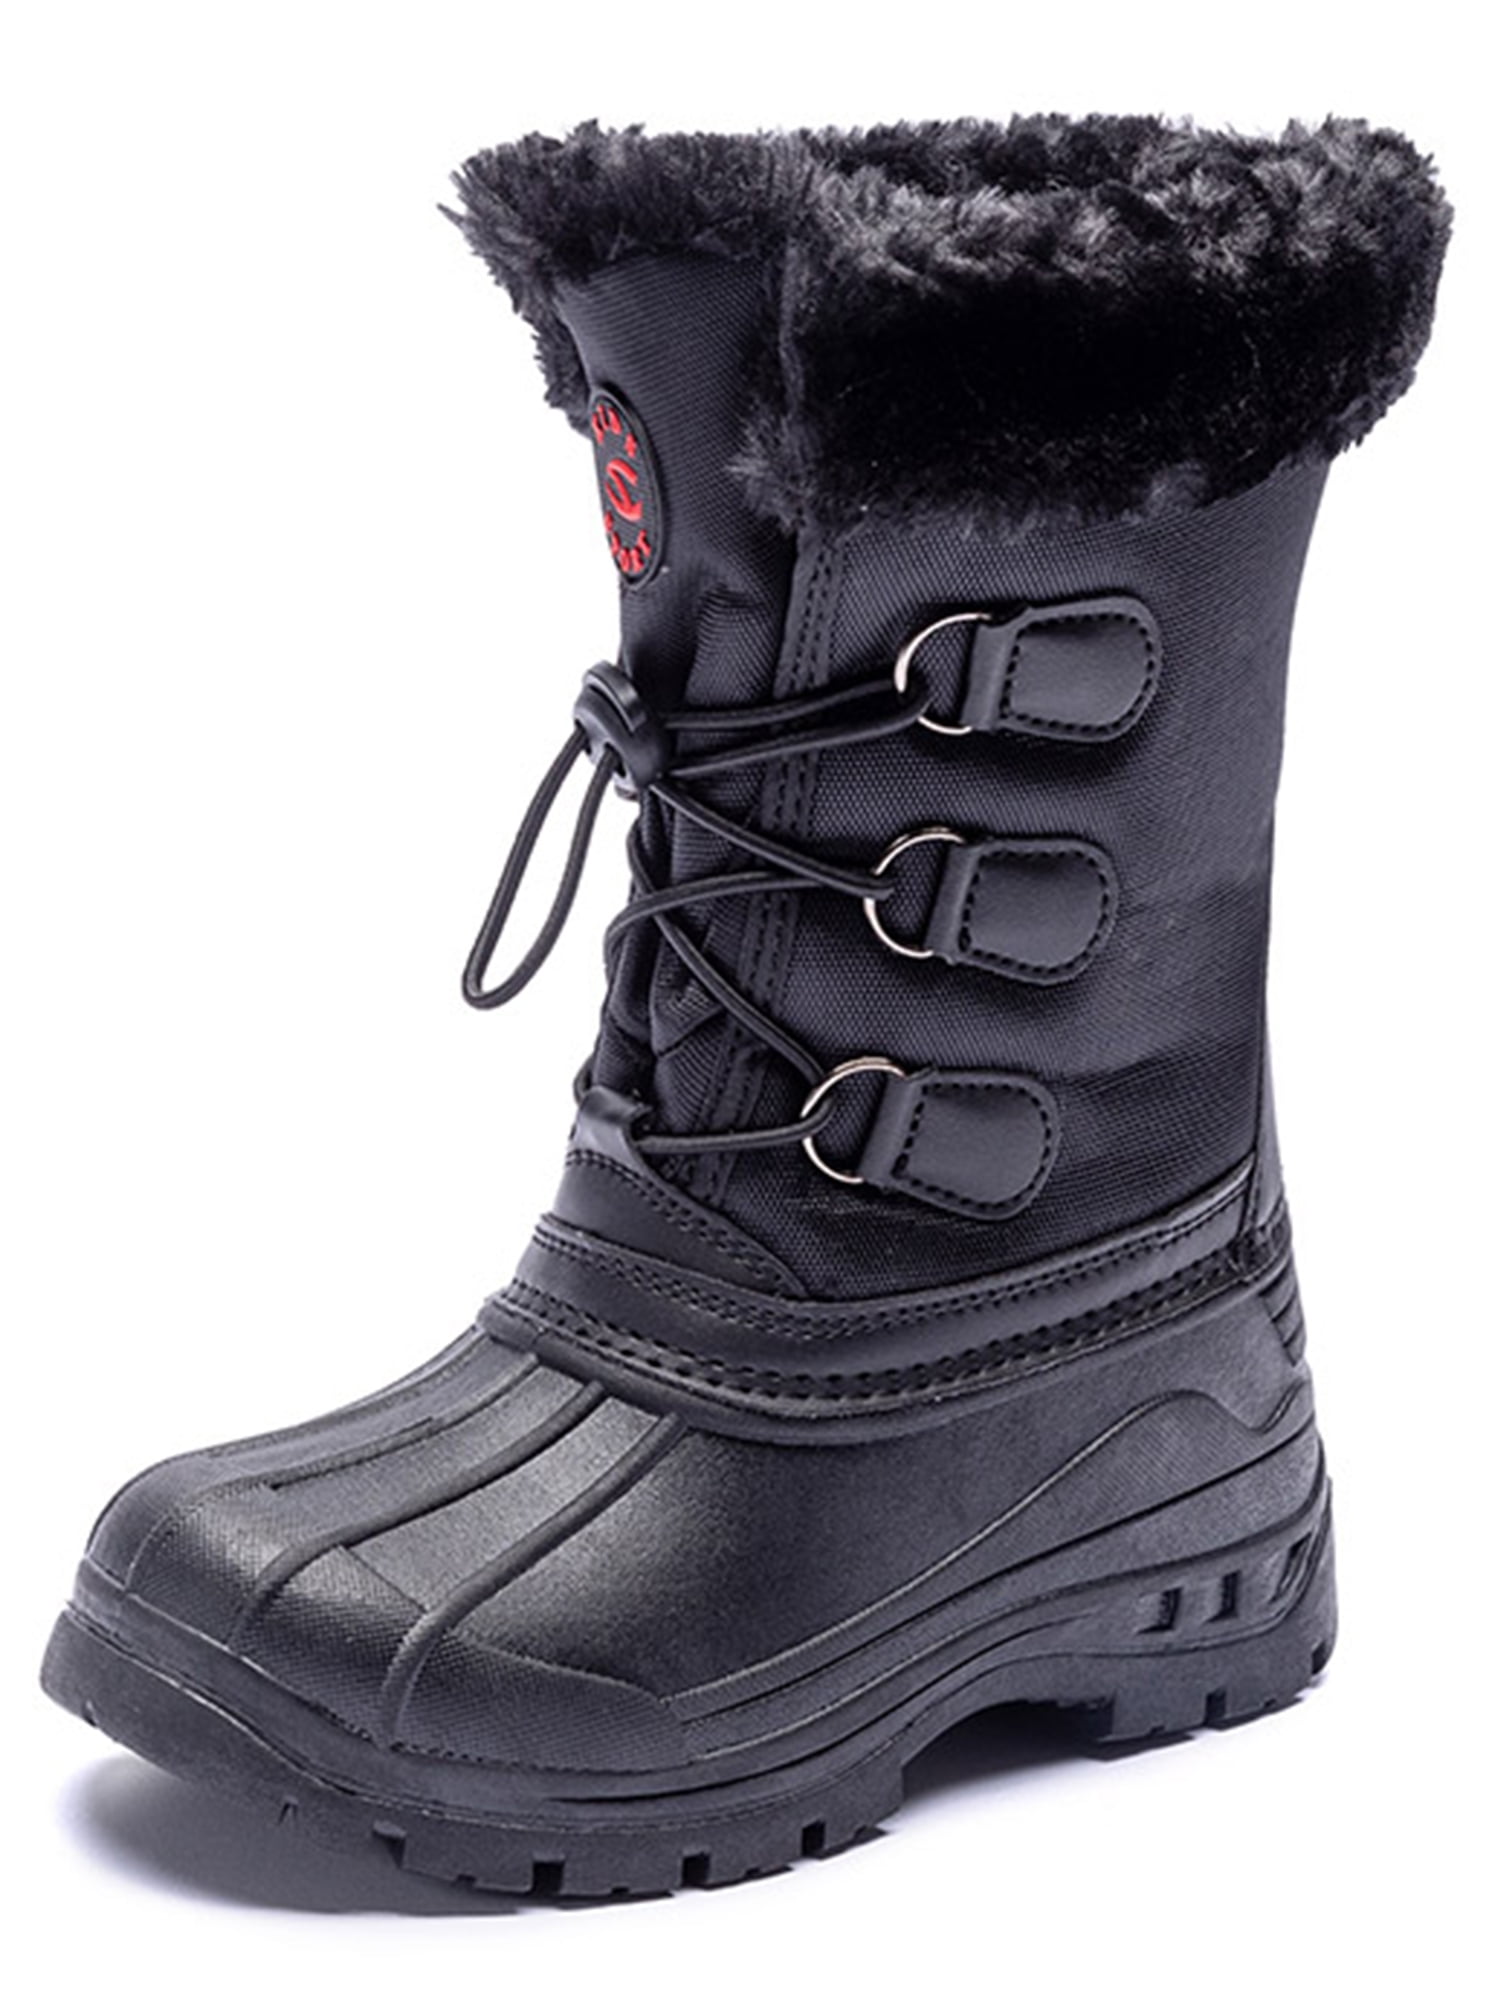 Own Shoe - Boys Snow Boots Winter Waterproof Slip Resistant Cold ...